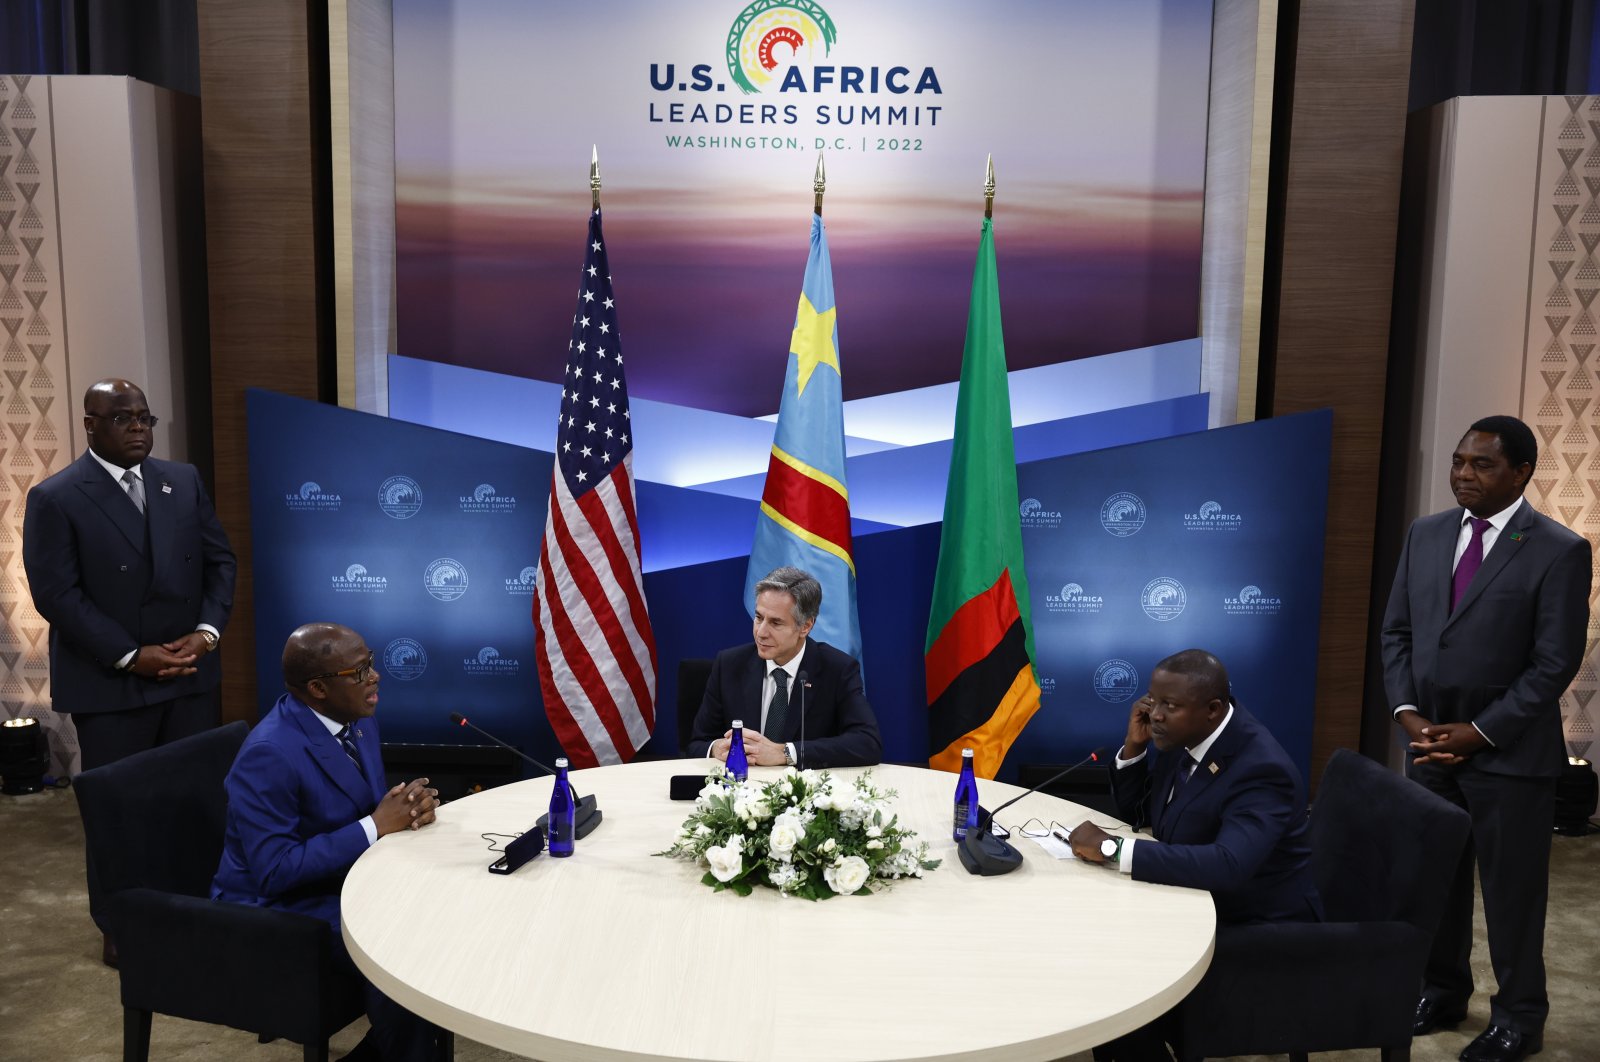 U.S. Secretary Antony Blinken (C) participates in a memorandum of understanding signing ceremony with Democratic Republic of the Congo (DRC) Foreign Minister Christophe Lutundula (L) and Zambian Foreign Minister Stanley Kakubo, in Washington, U.S., Dec. 13, 2022. (AP Photo)